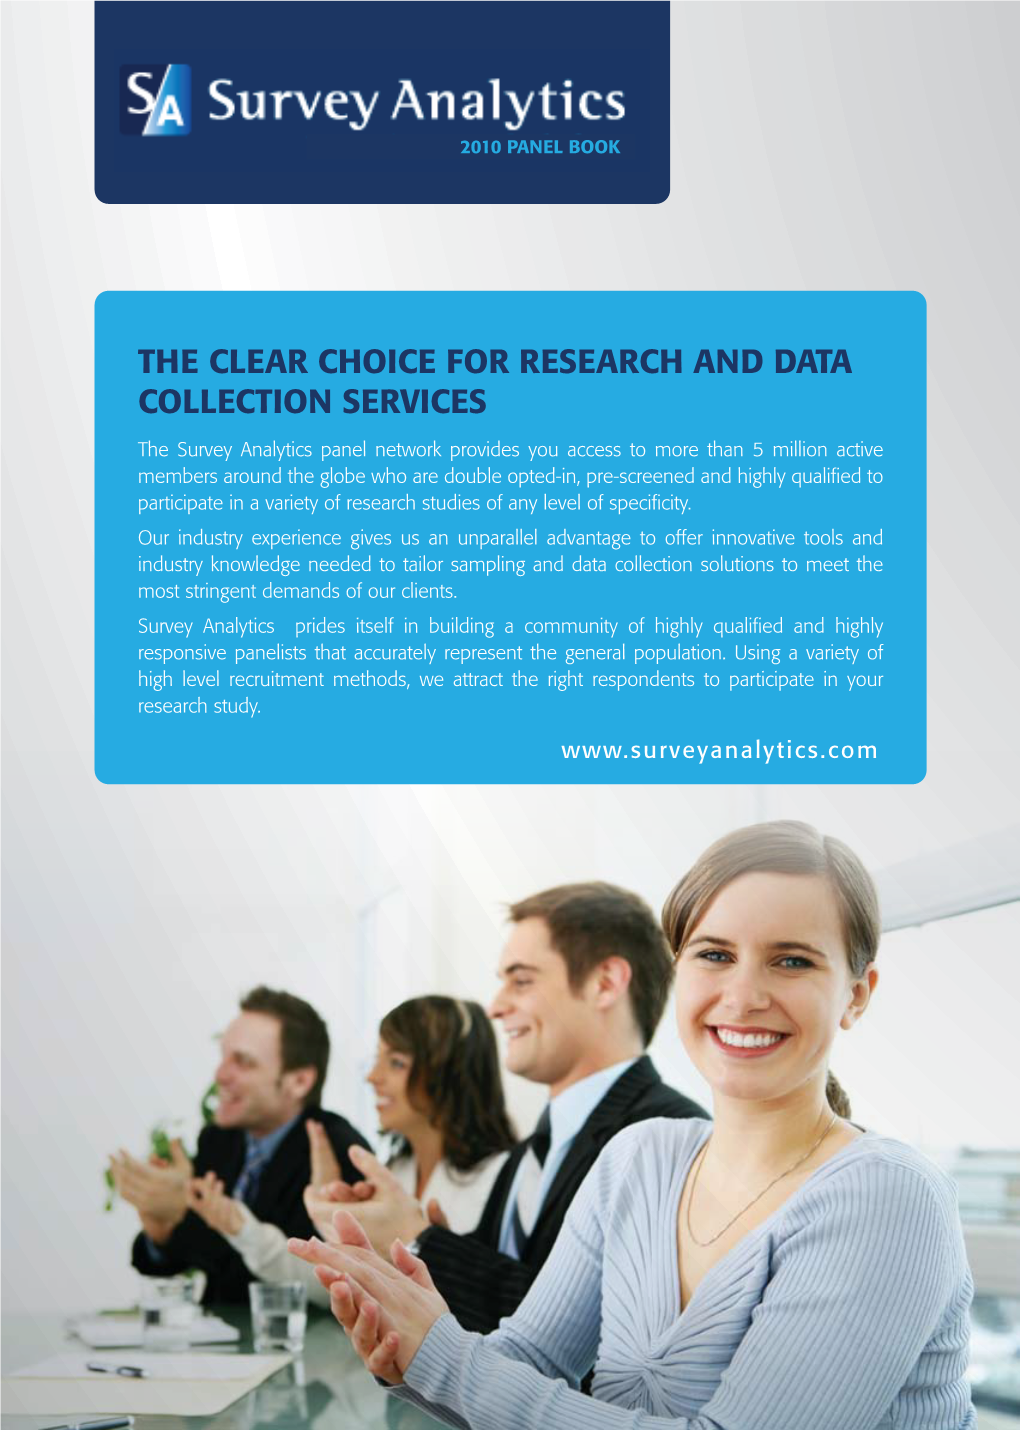 The Clear Choice for Research and Data Collection Services